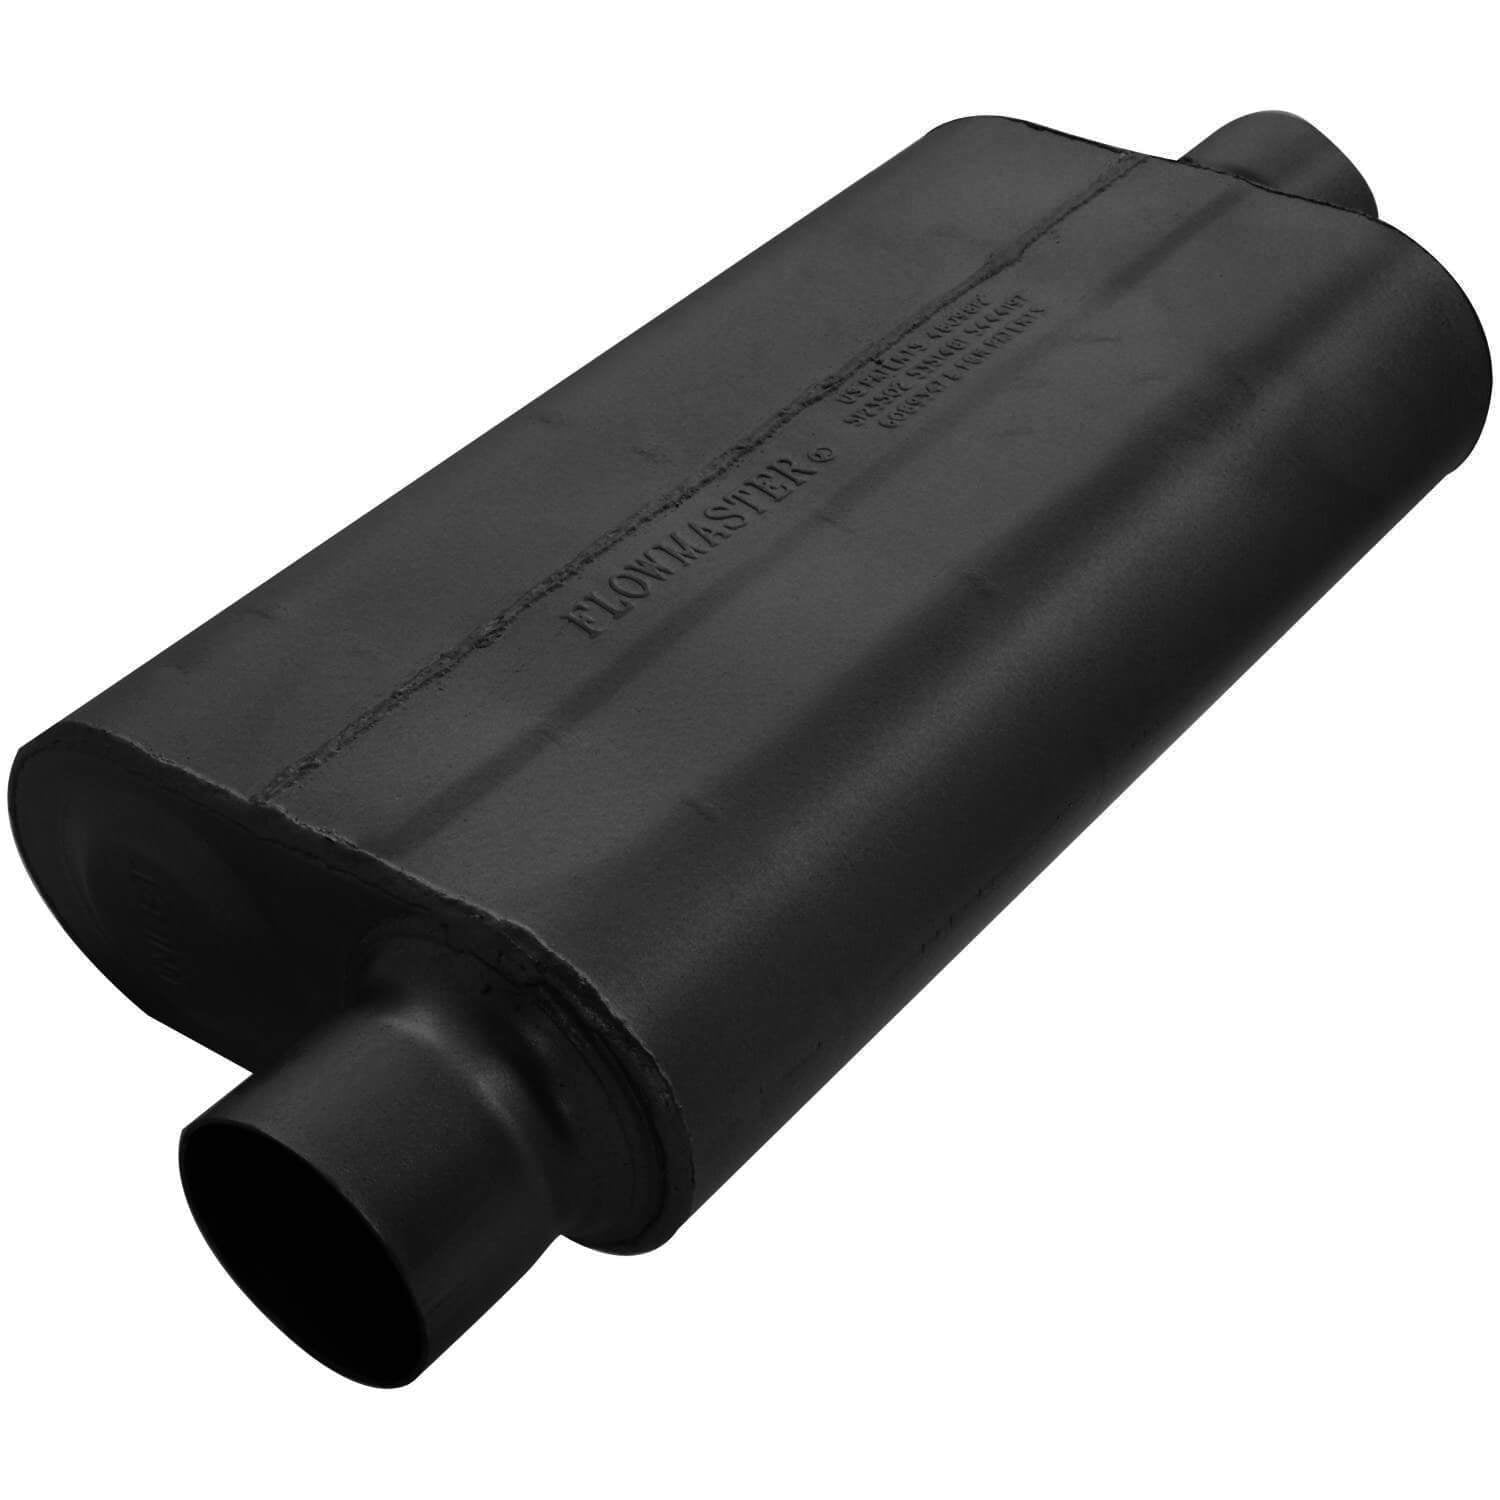 Flowmaster 943051 50 Delta Flow Muffler - 3.00 Offset In / 3.00 Center Out  - Moderate Sound Fits select: 1966-1967 PLYMOUTH BELVEDERE